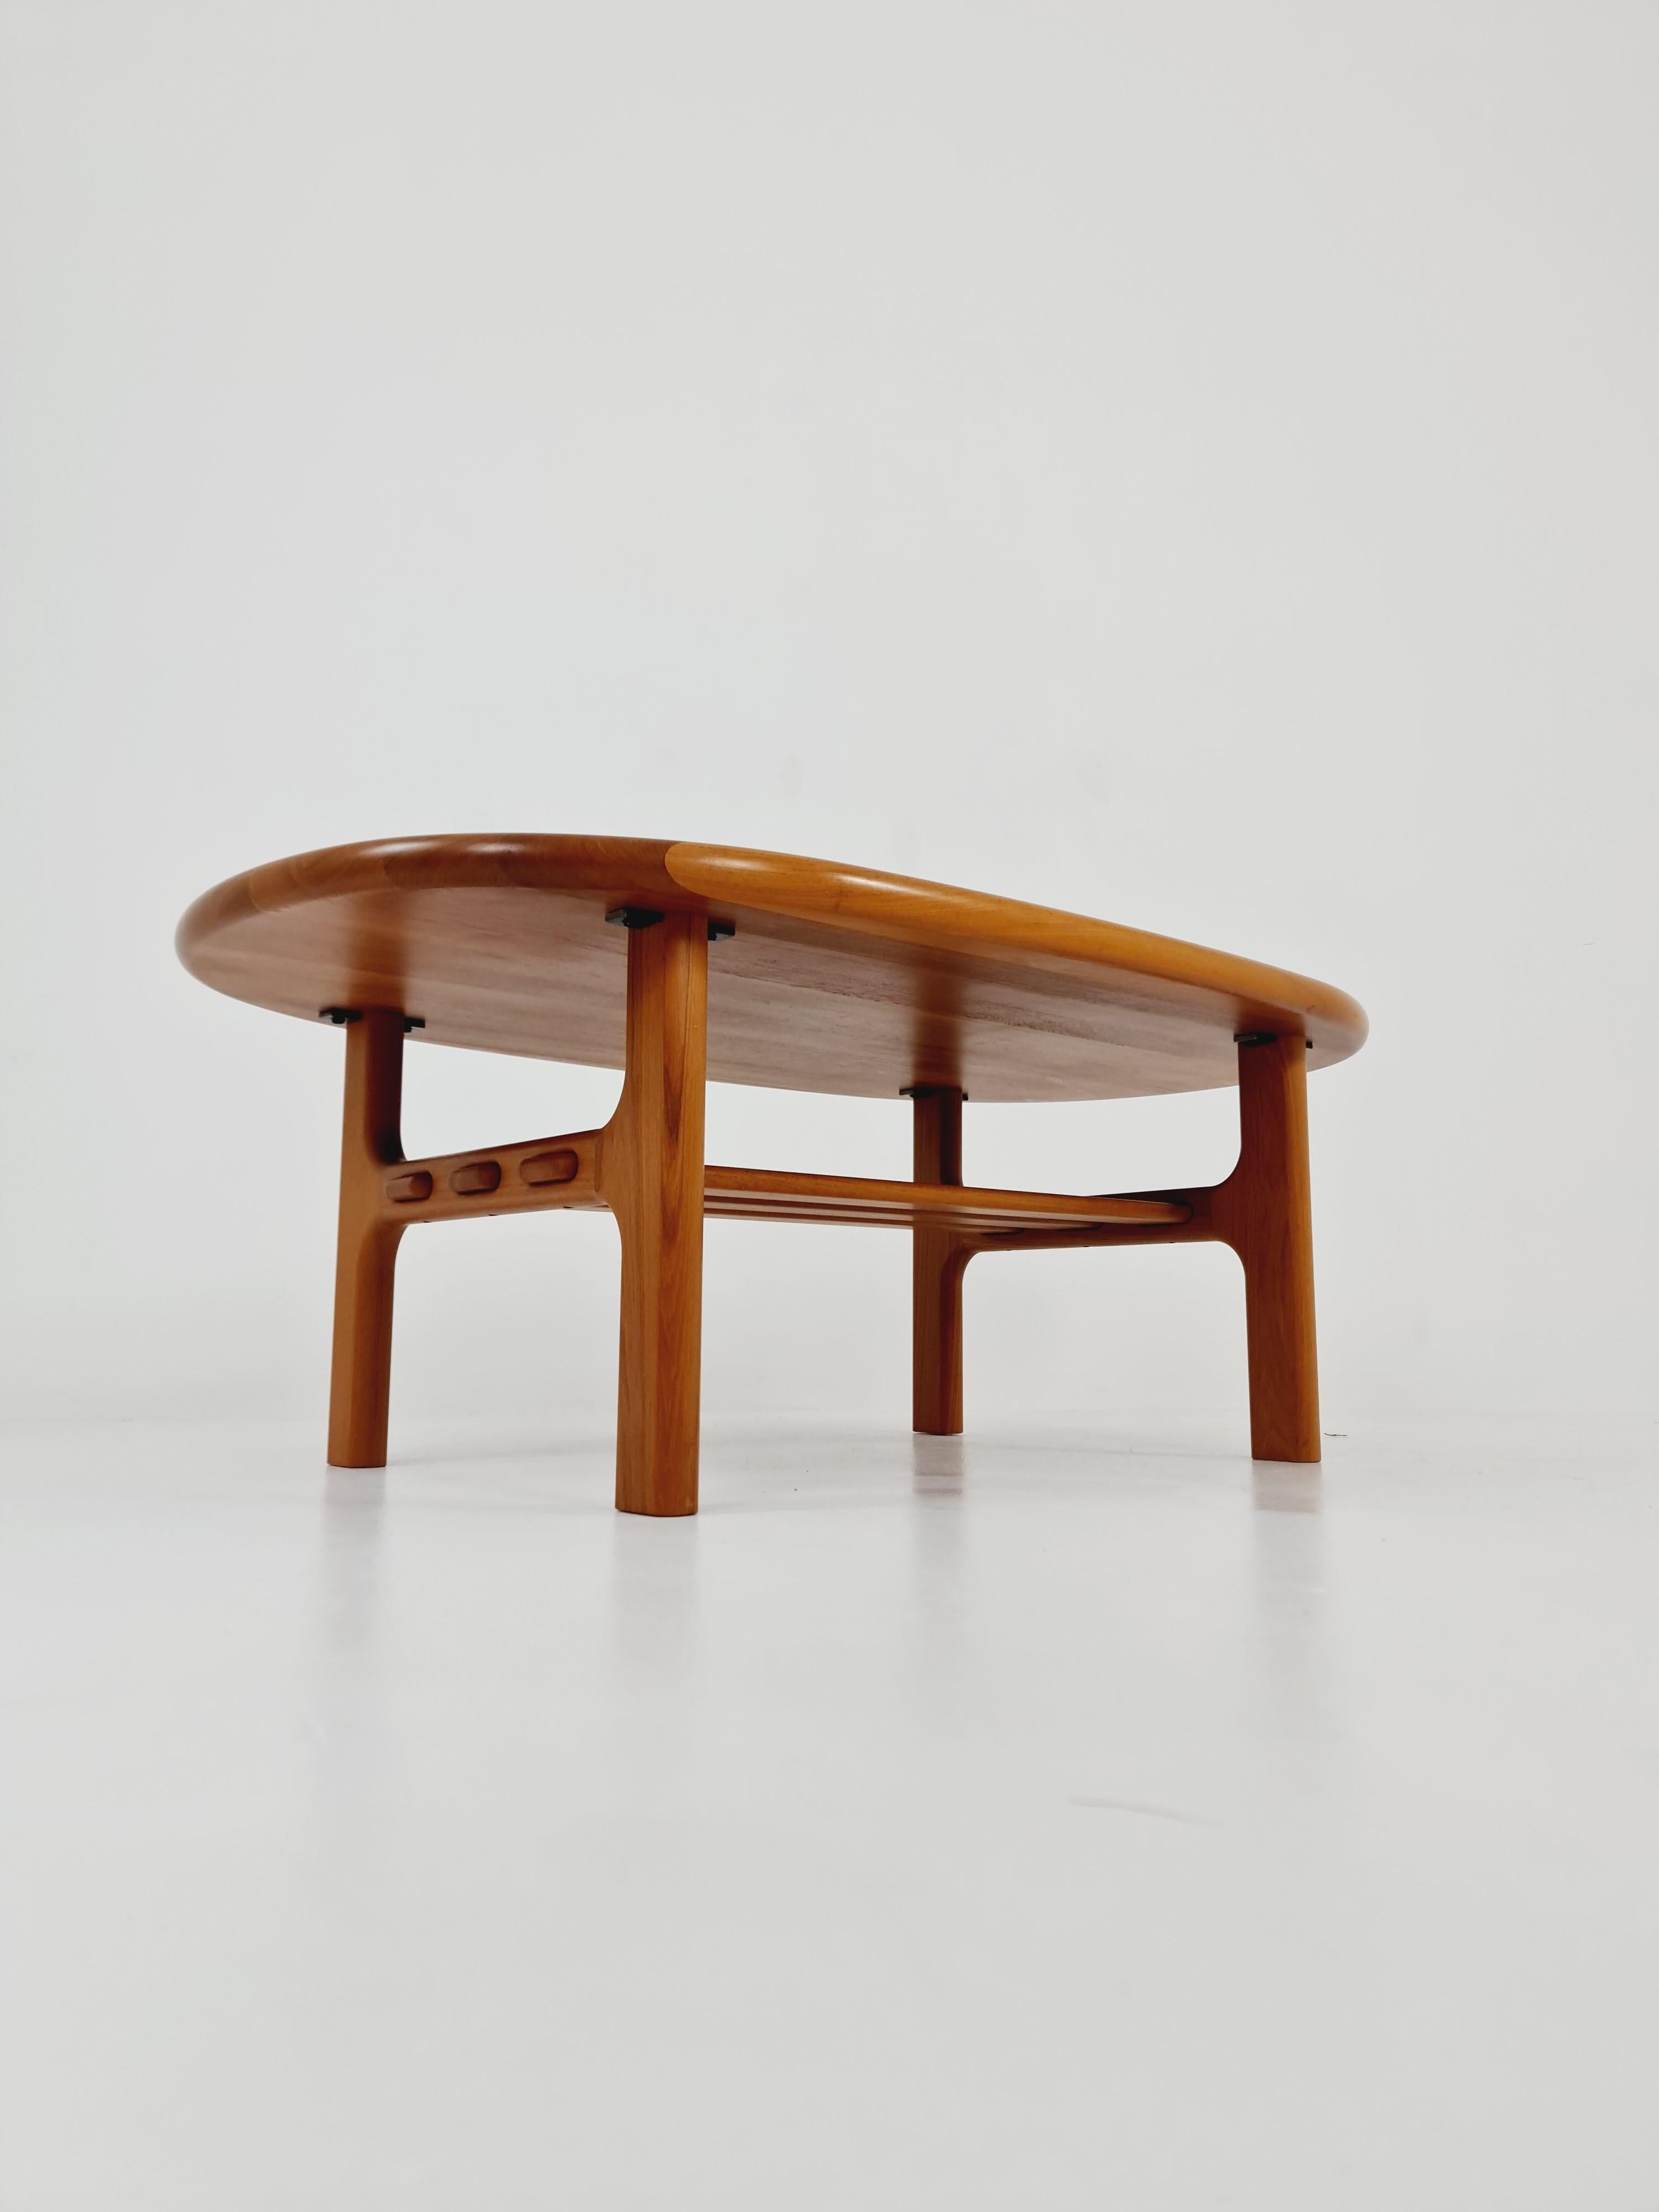 Danish Teak solid coffee table/ side table By Niels Bach for Randers Möbel, 1960 For Sale 3